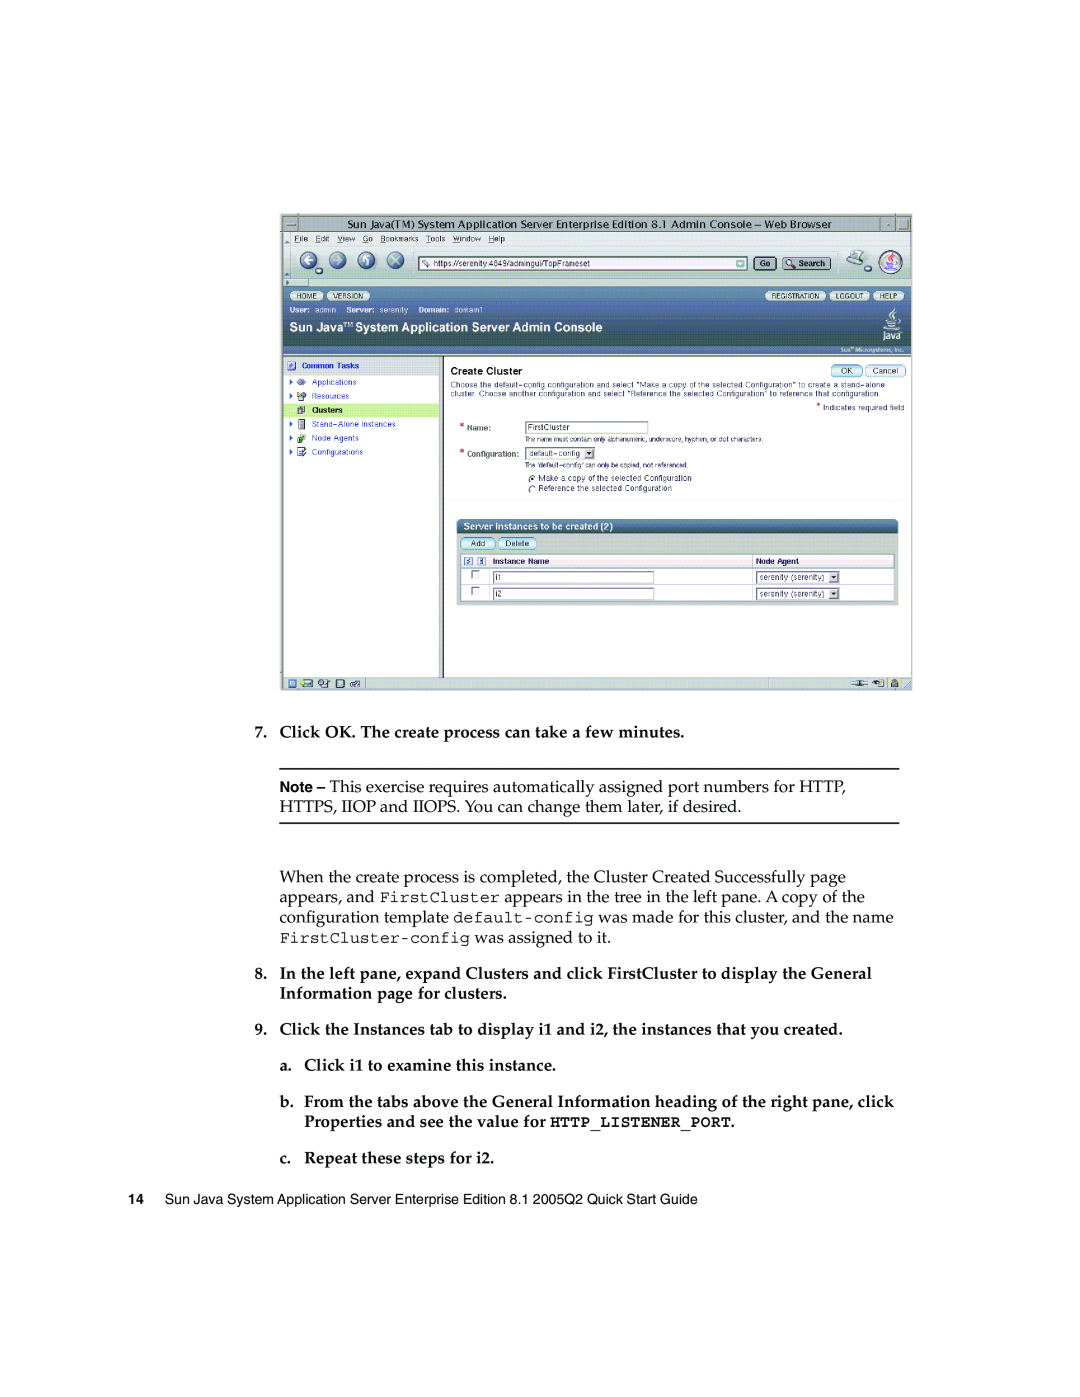 Sun Microsystems 2005Q2 quick start Click OK. The create process can take a few minutes 